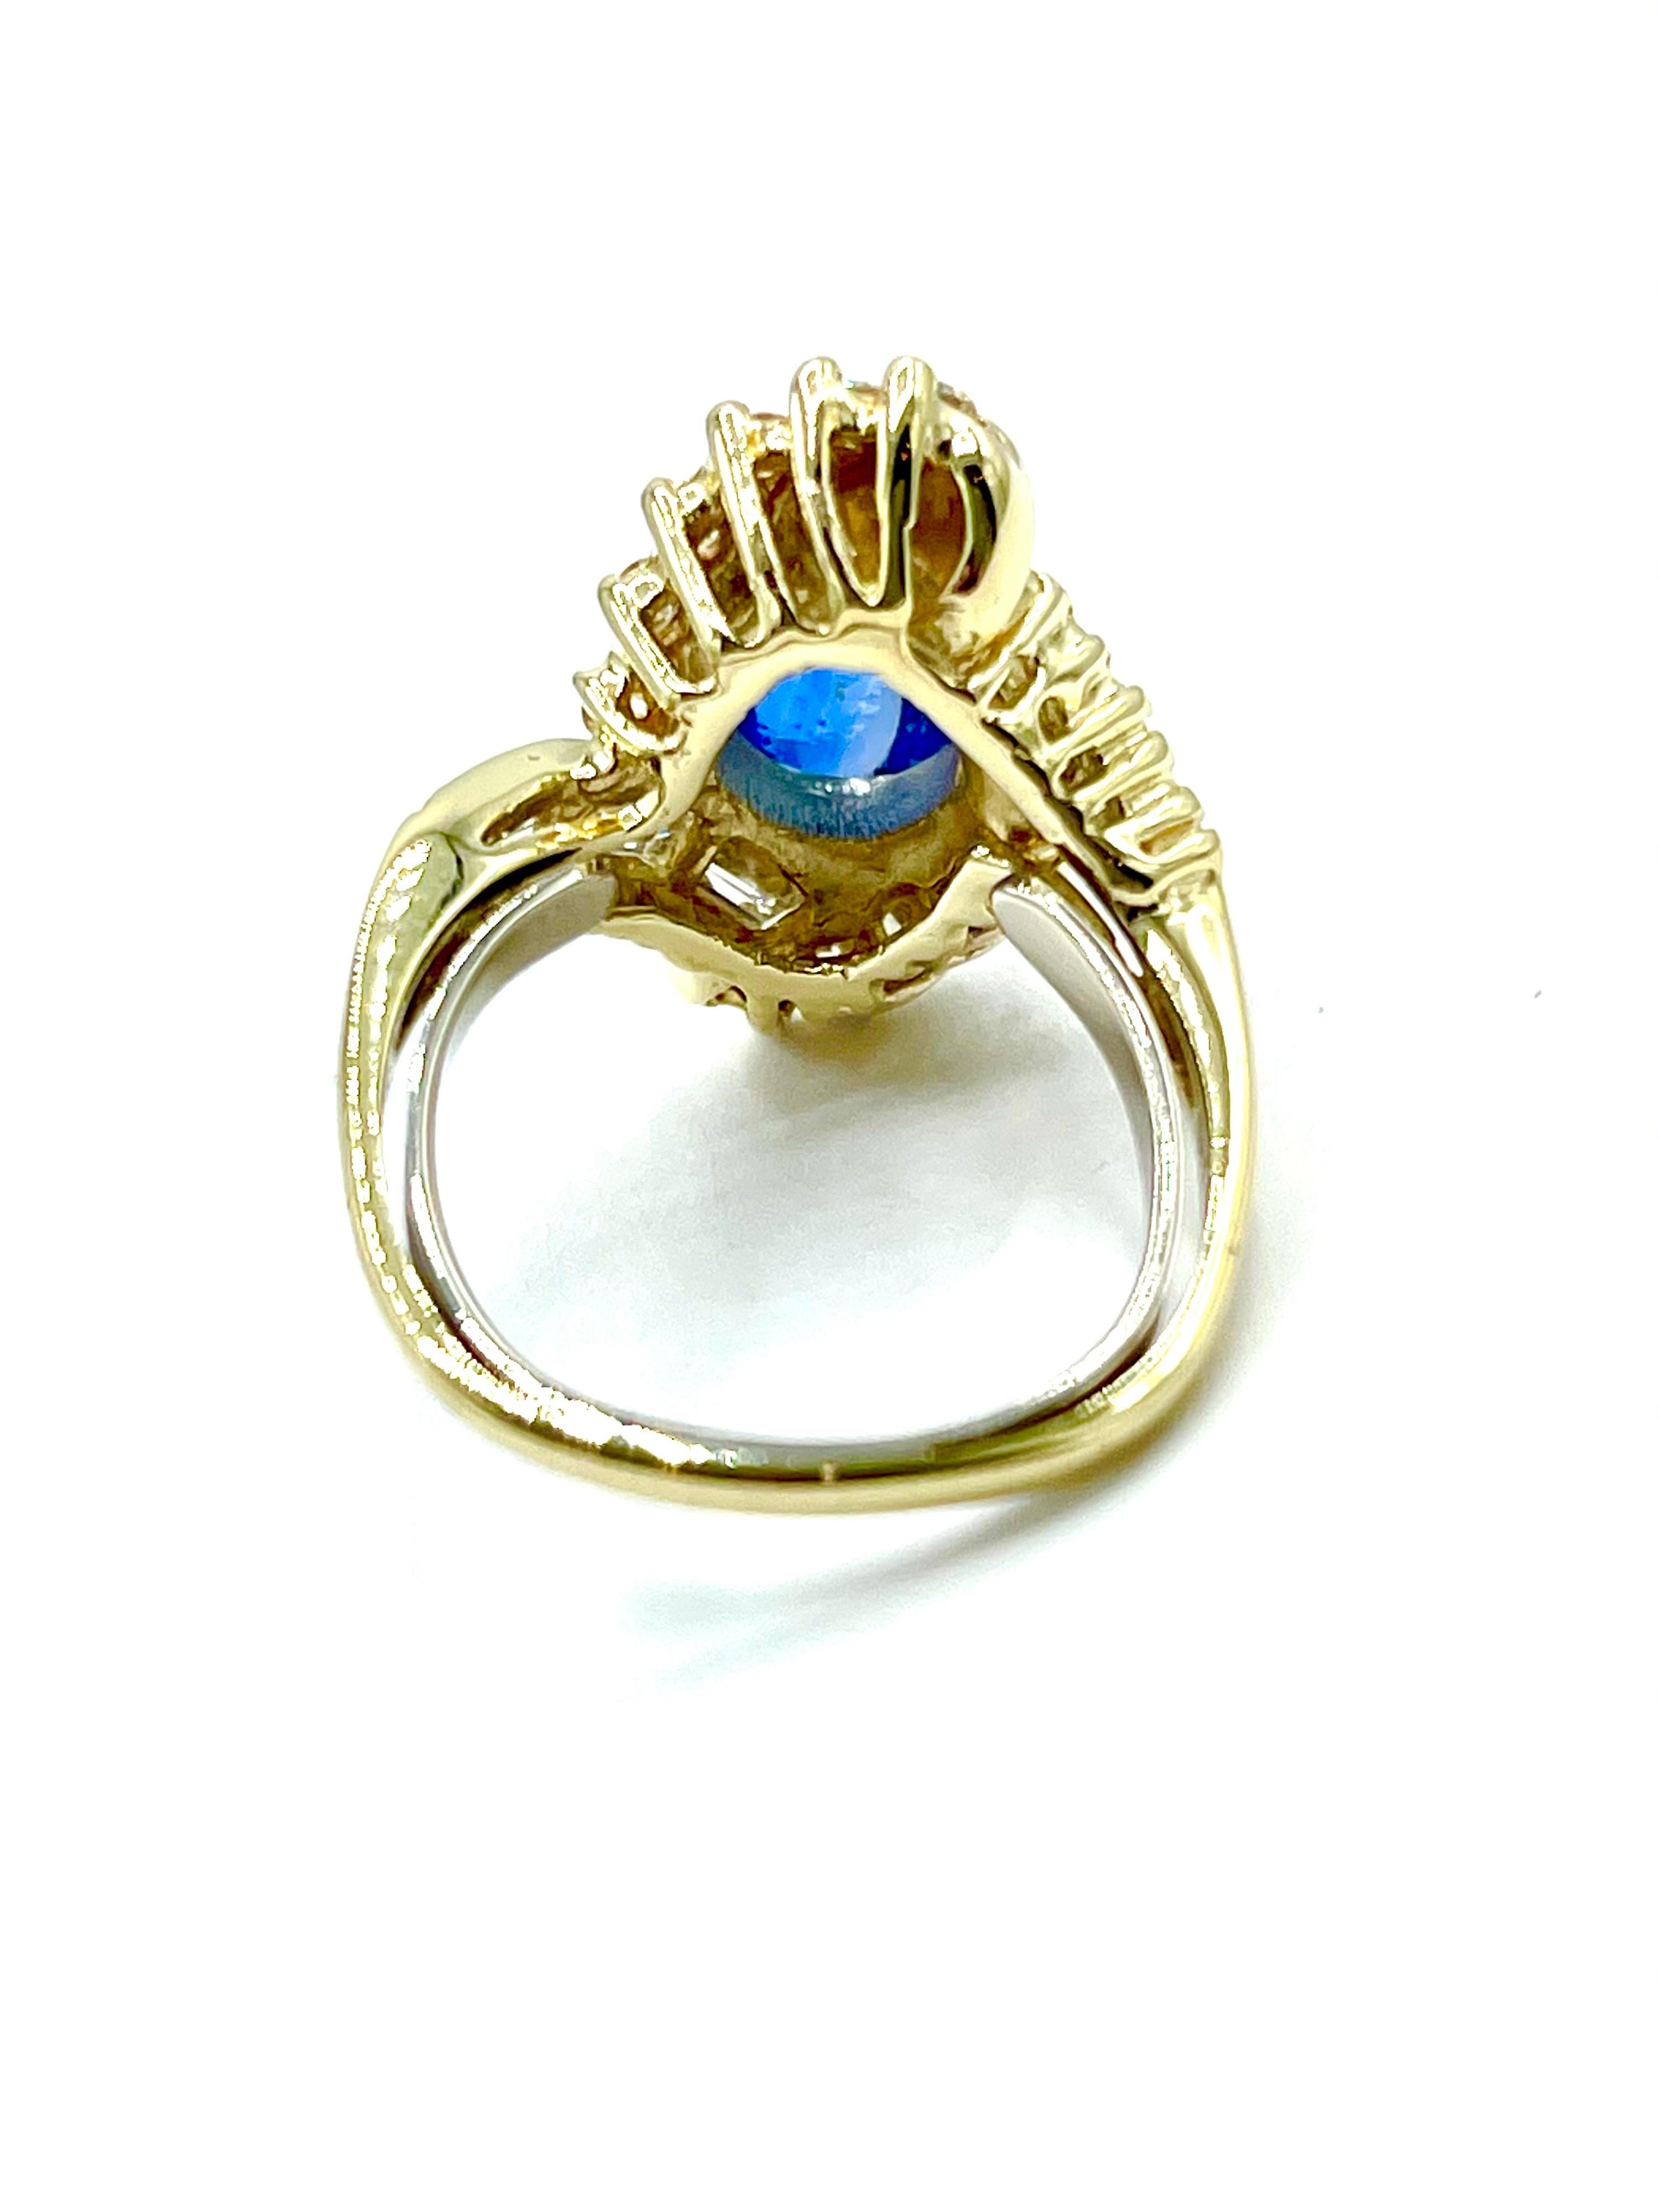 3.78 Carat Cabochon Sapphire and Diamond Yellow Gold Ring For Sale 2